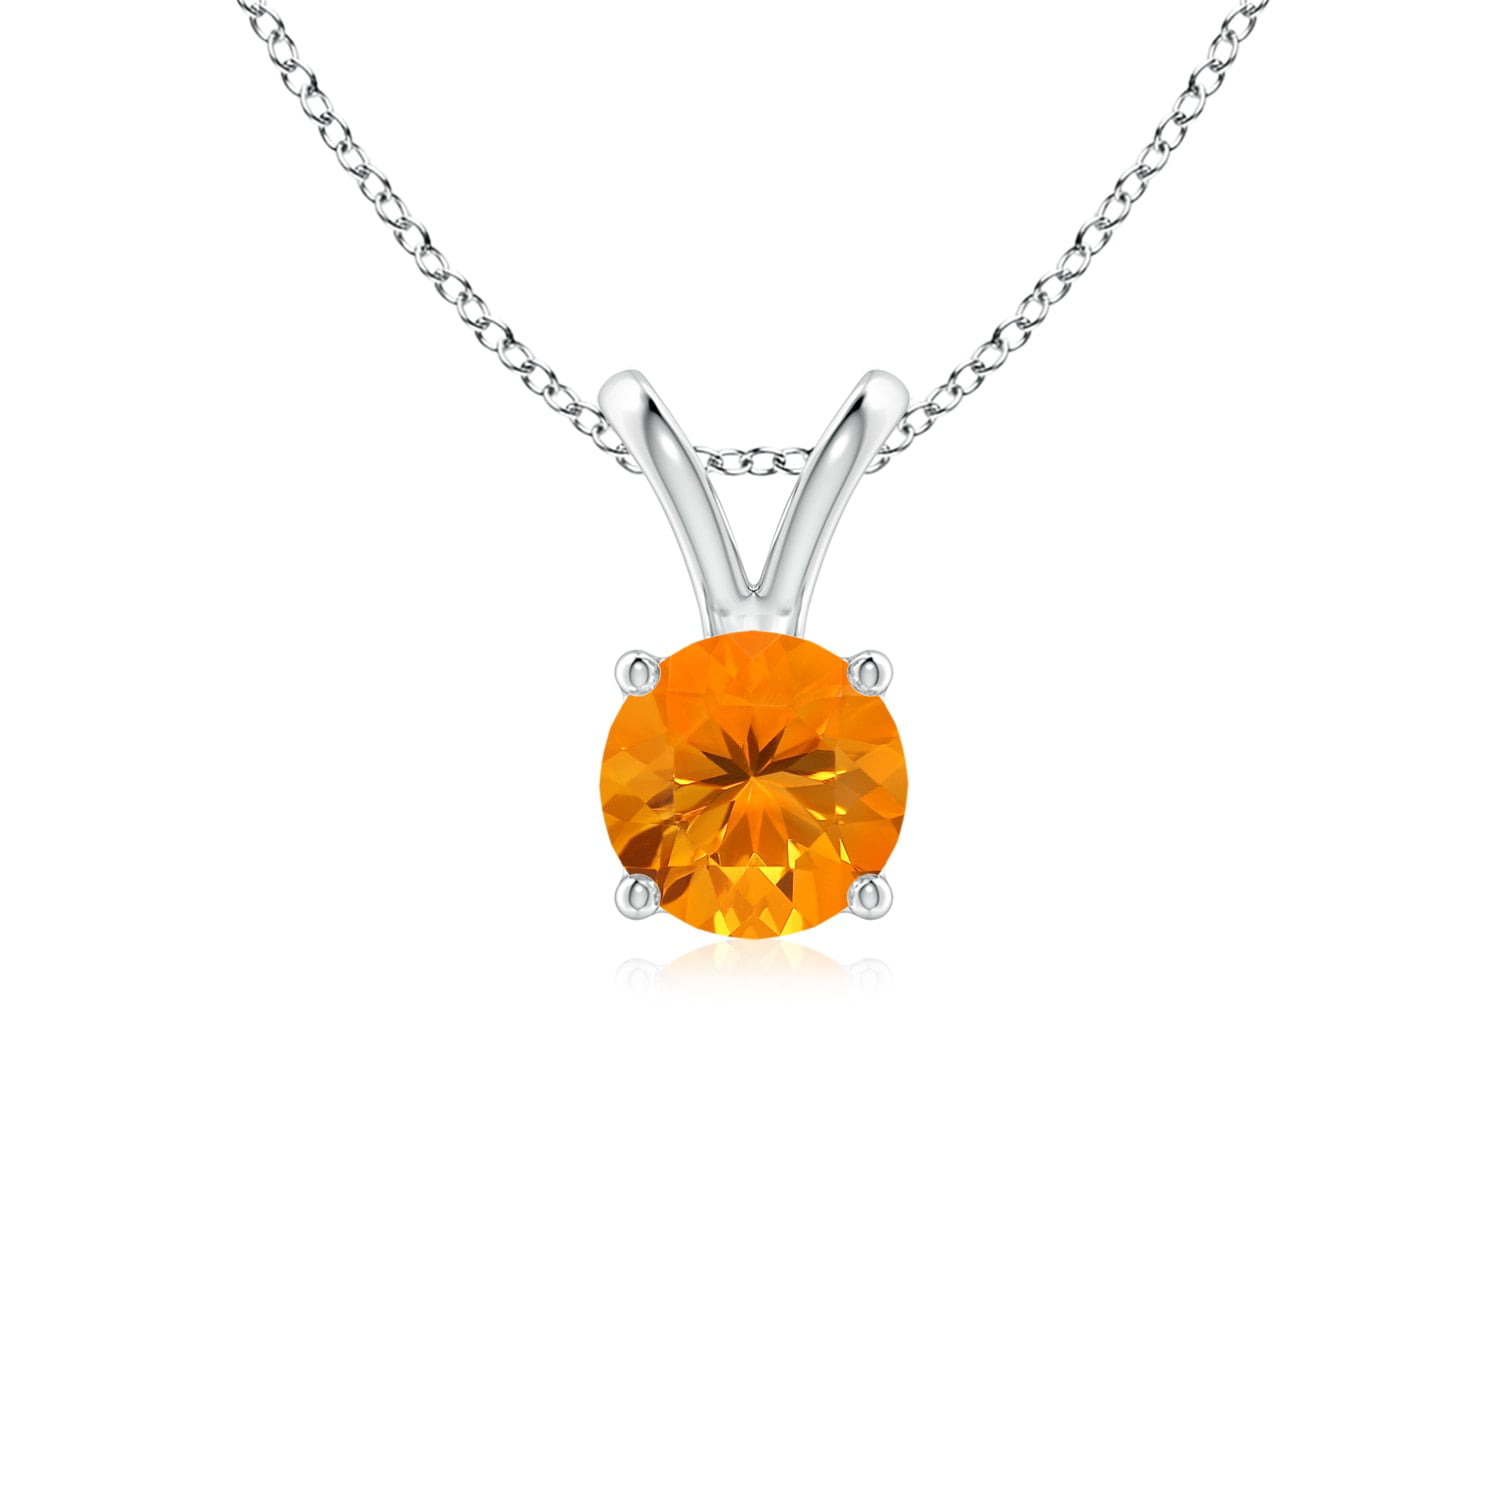 14k Yellow/White Gold 7mm Orange Fire Simulated Opal Pendant Necklace 